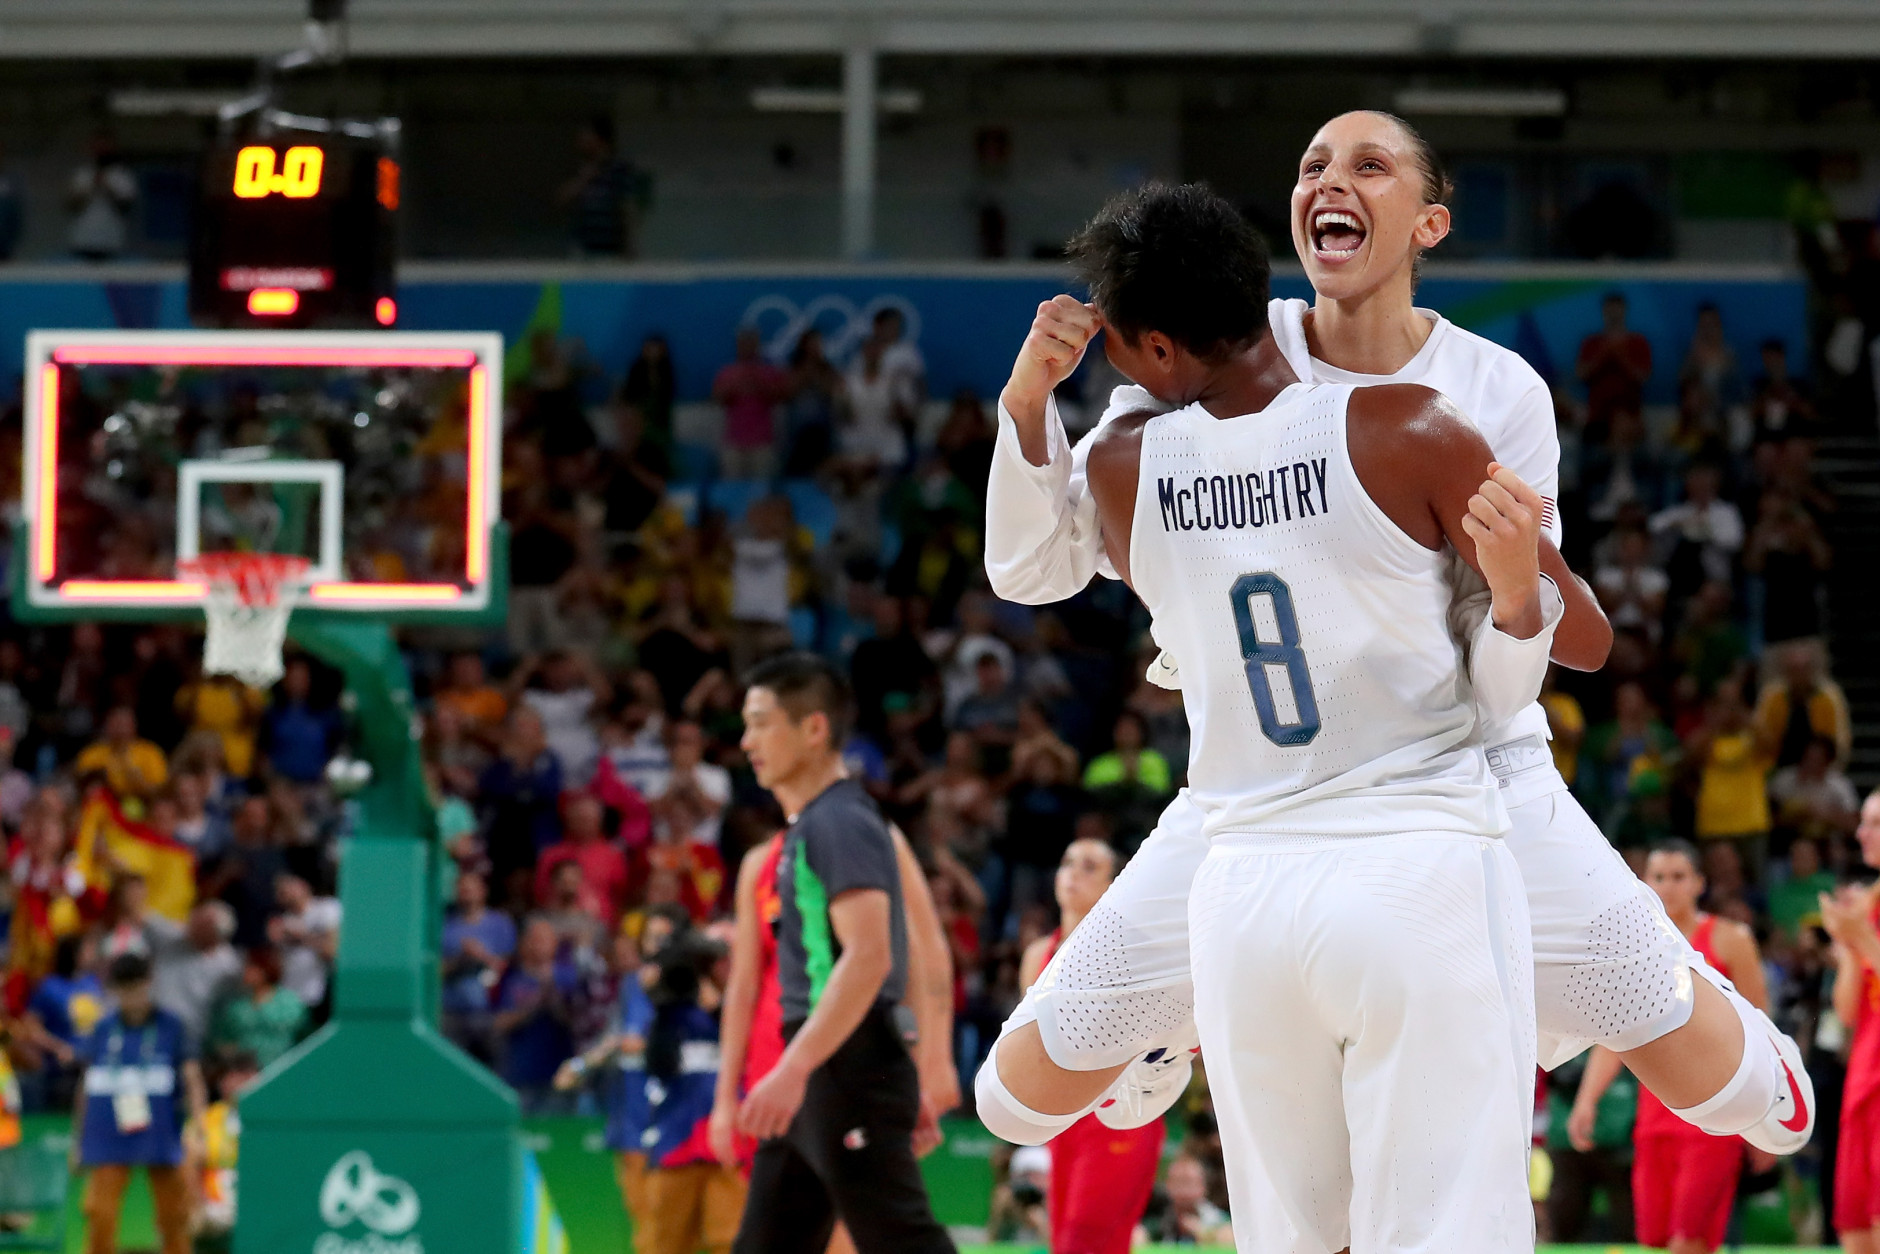 RIO DE JANEIRO, BRAZIL - AUGUST 20:  Angel Mccoughtry #8 and Diana Taurasi #12 of United States celebrate after winning the Women's Gold Medal Game between United States and Spain on Day 15 of the Rio 2016 Olympic Games at Carioca Arena 1 on August 20, 2016 in Rio de Janeiro, Brazil.  (Photo by Tom Pennington/Getty Images)